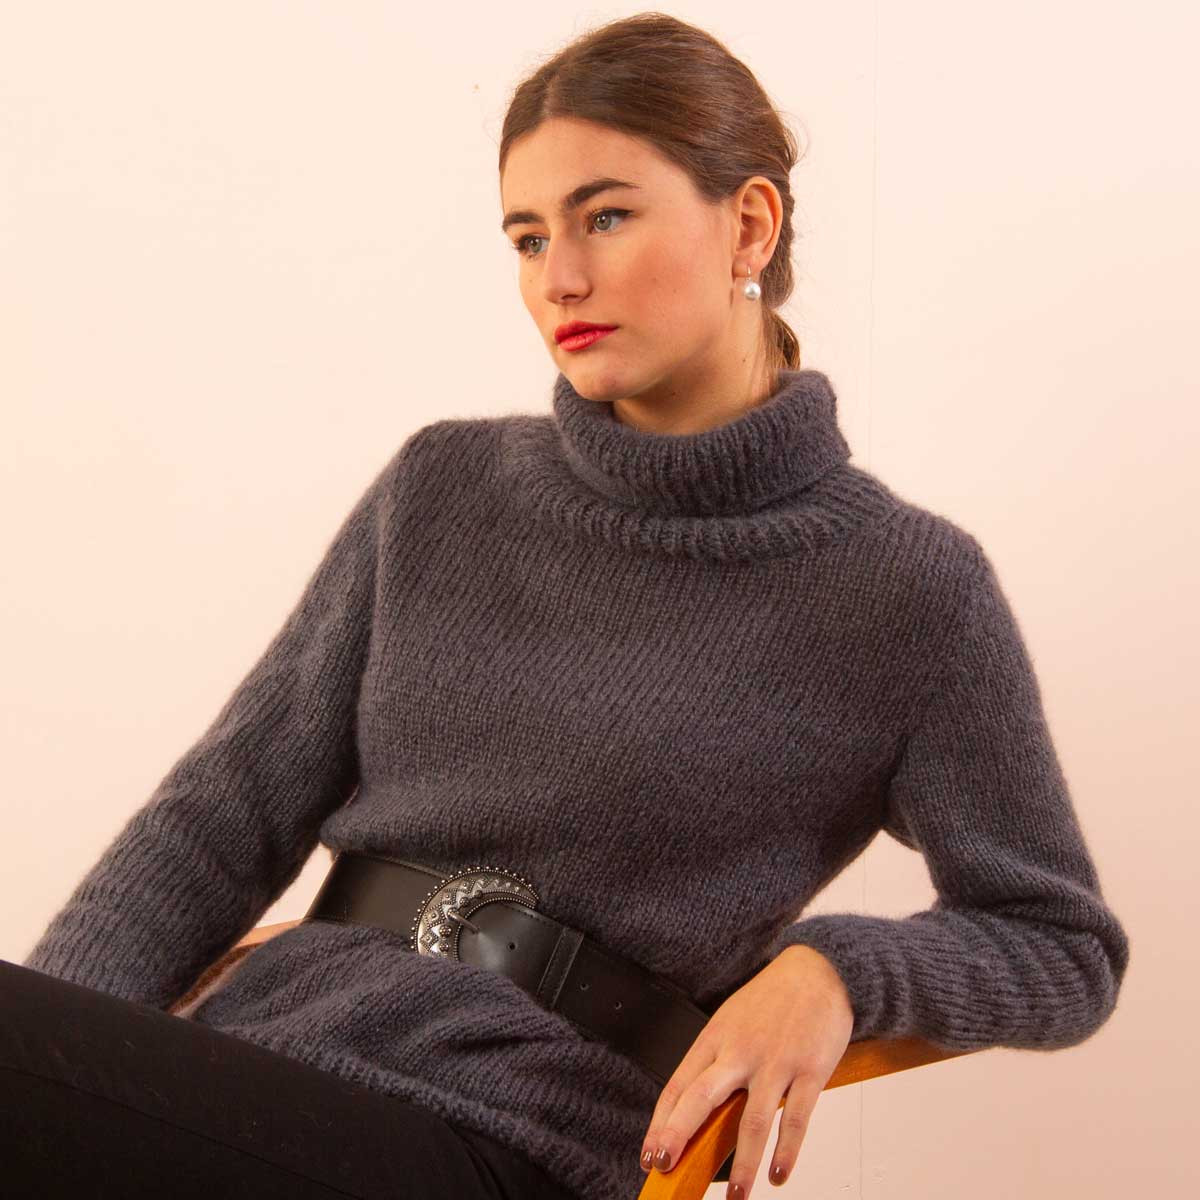 Colletia ready-to-knit sweater